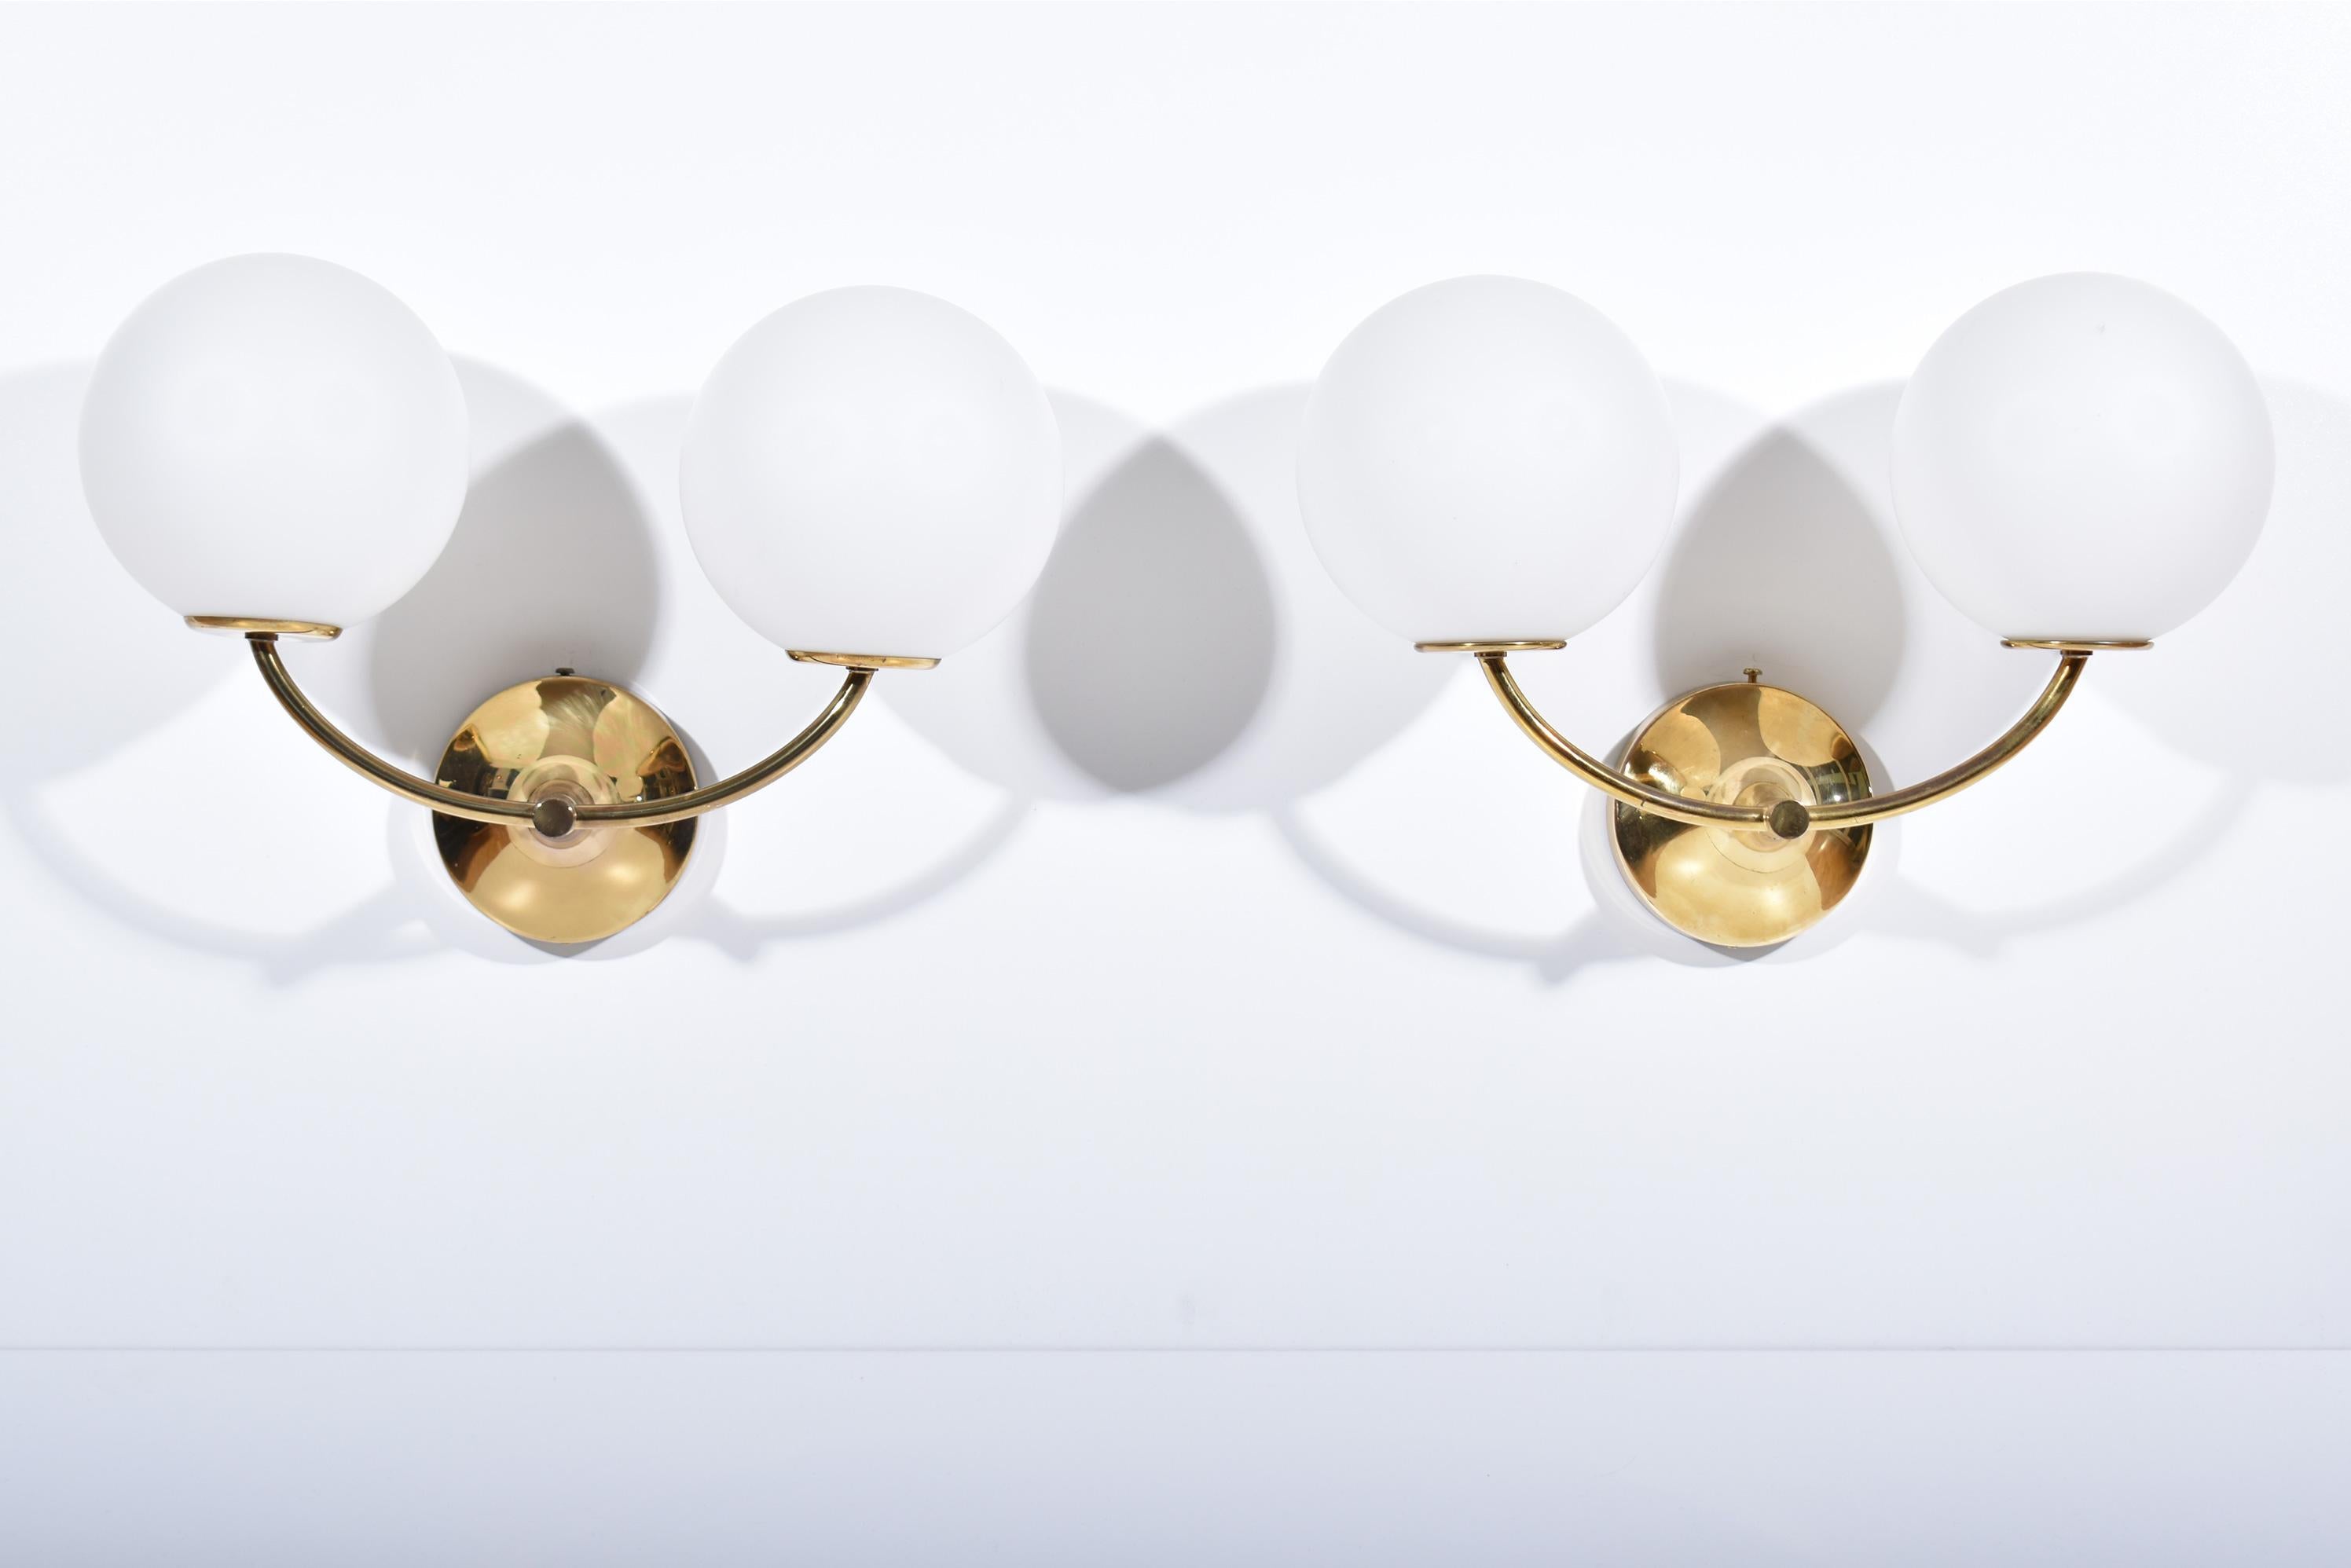 Set of four brass sconces, each with two glass globes.
Original design, at the crossroads of Art-Déco, Bauhaus and Mid-century modern.
Simple and elegant, it was designed by E.R. Nele, but is usually attributed to Max Bill. 
It was produced in